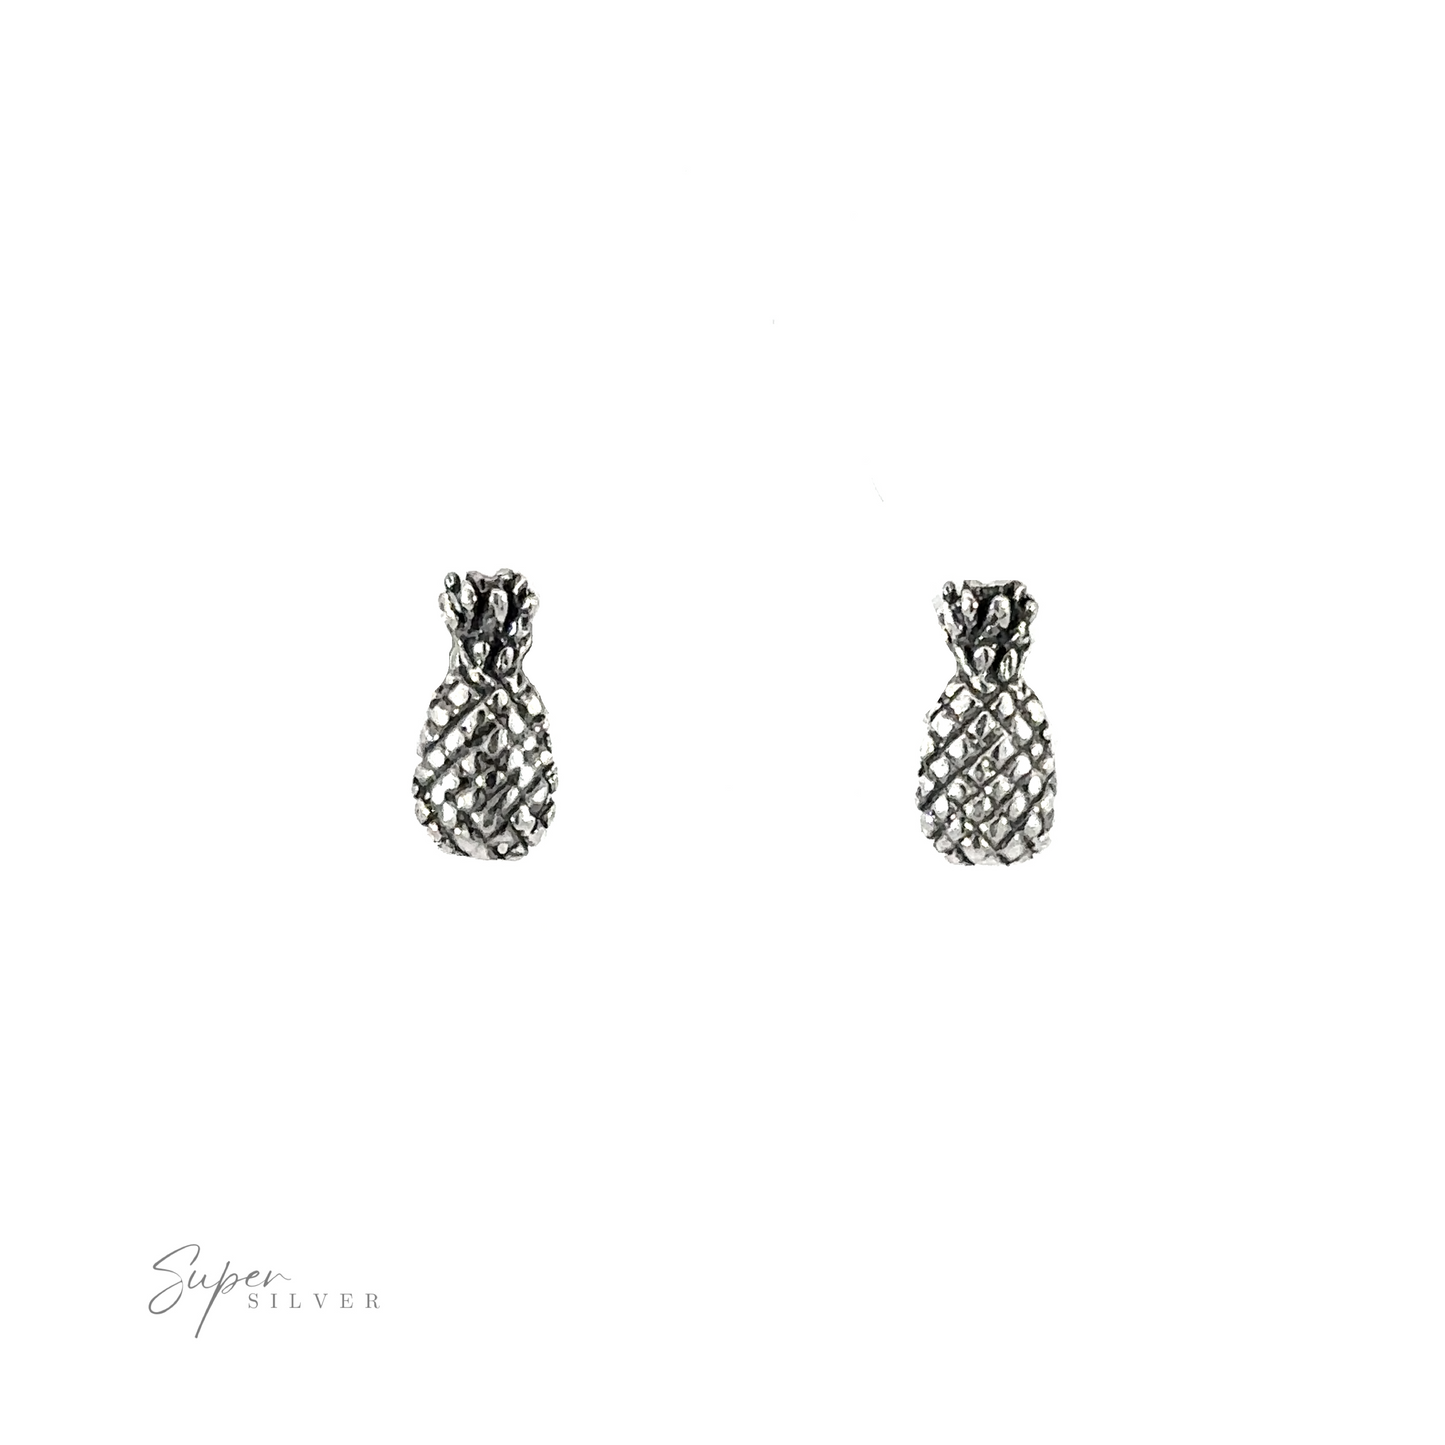 These cute Pineapple Studs are the perfect addition to your everyday outfits, gleaming in silver on a white background.